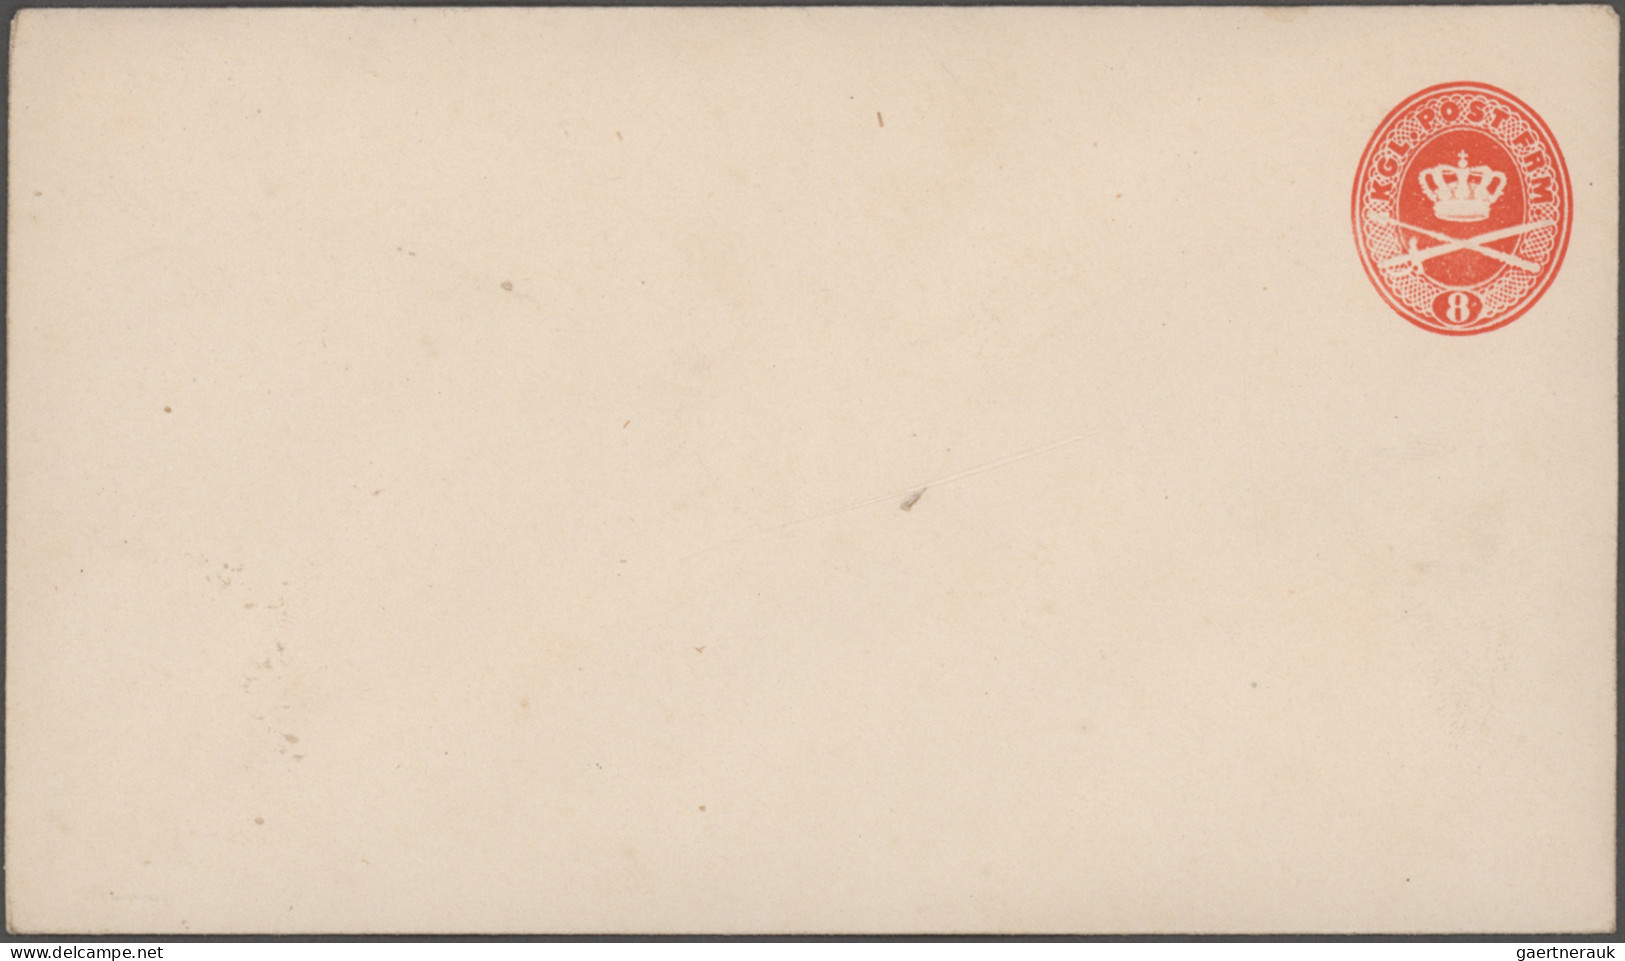 Scandinavia: 1870/1910's ca.: About 125 postal stationery items, mint and used,